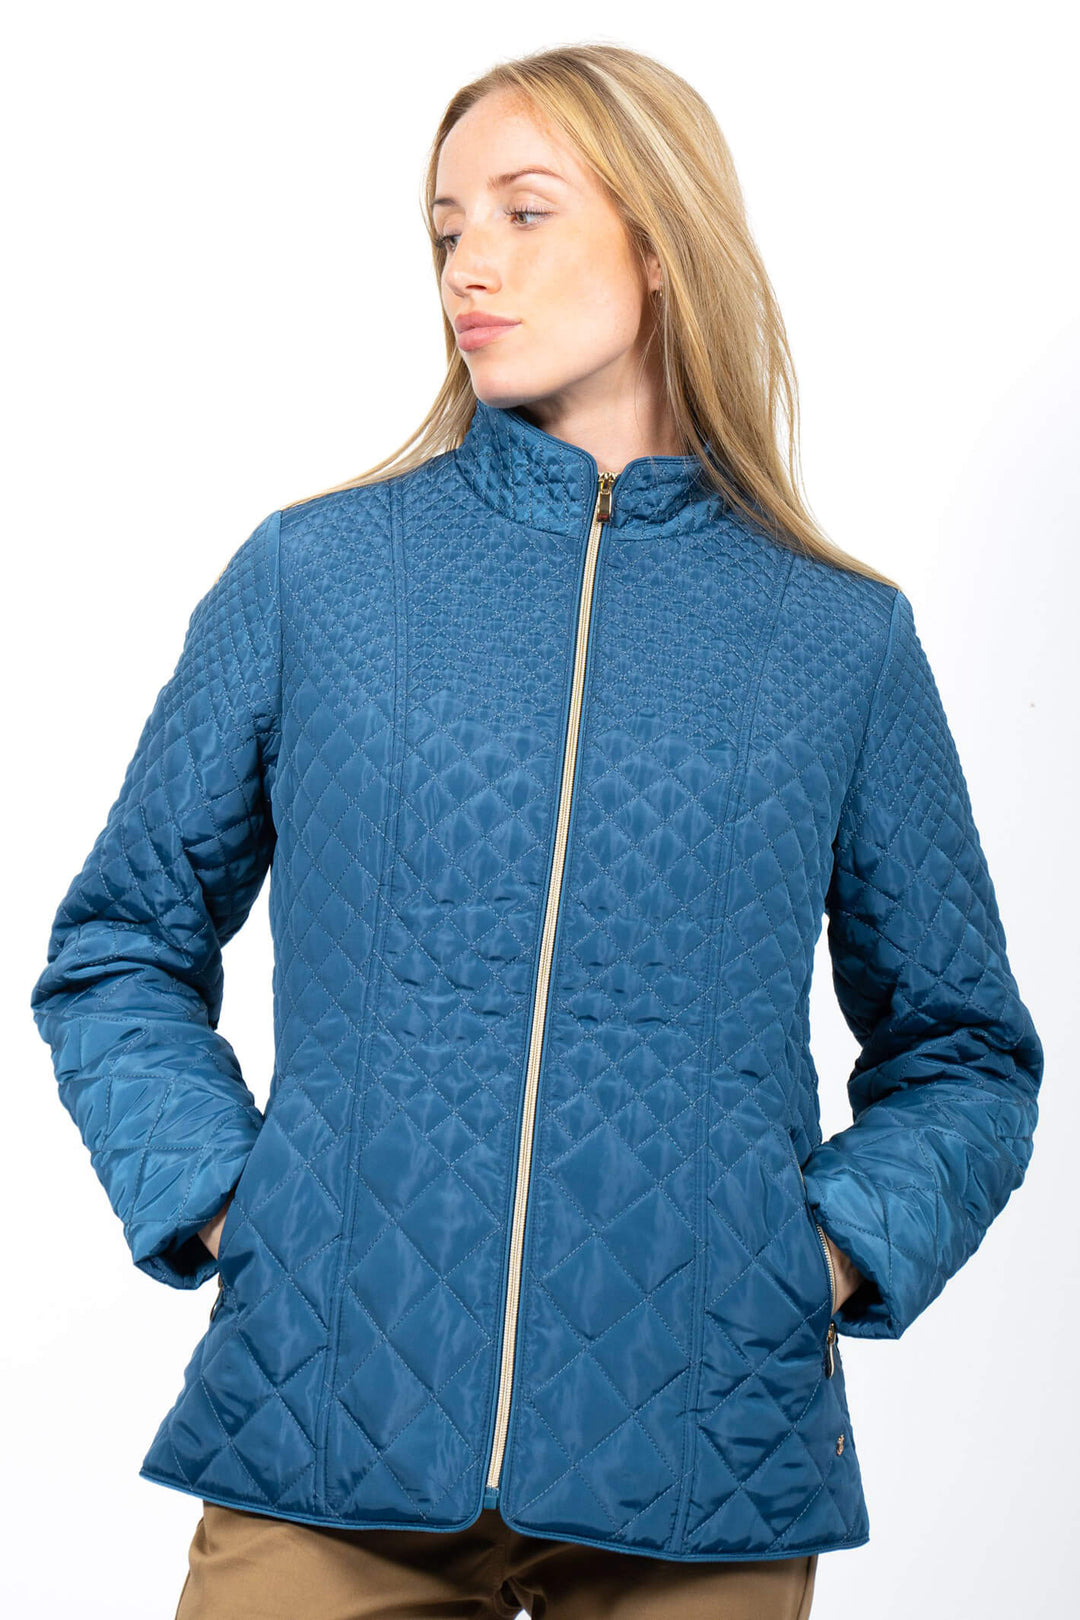 Jessica Graff 26051 Teal Diamond Quilted Short Coat - Experience Boutique